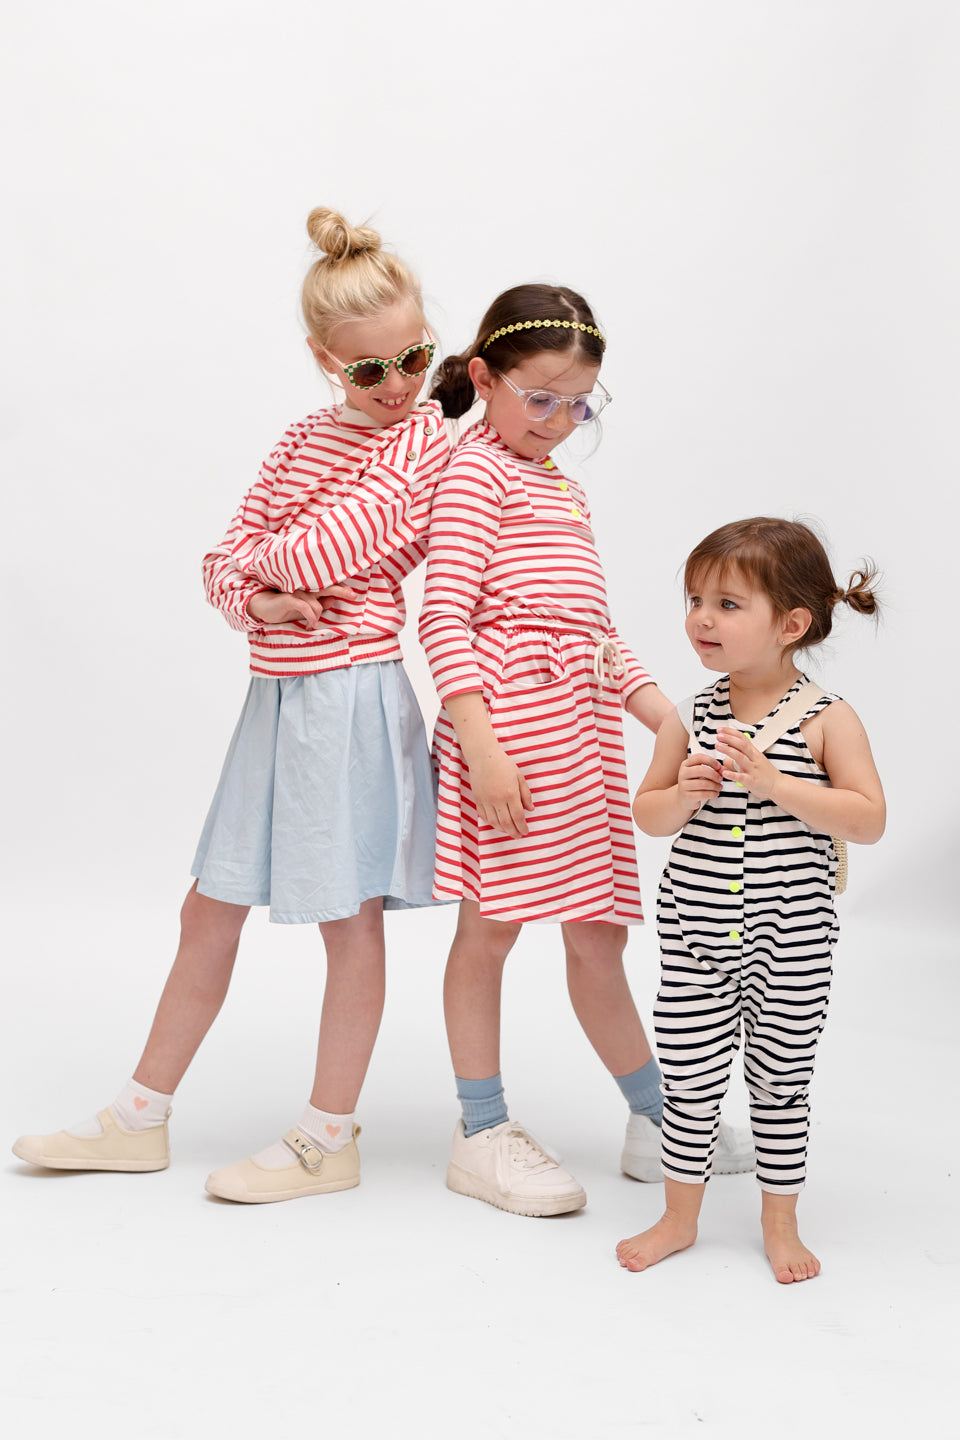 Striped Hooded Dress - White/Coral